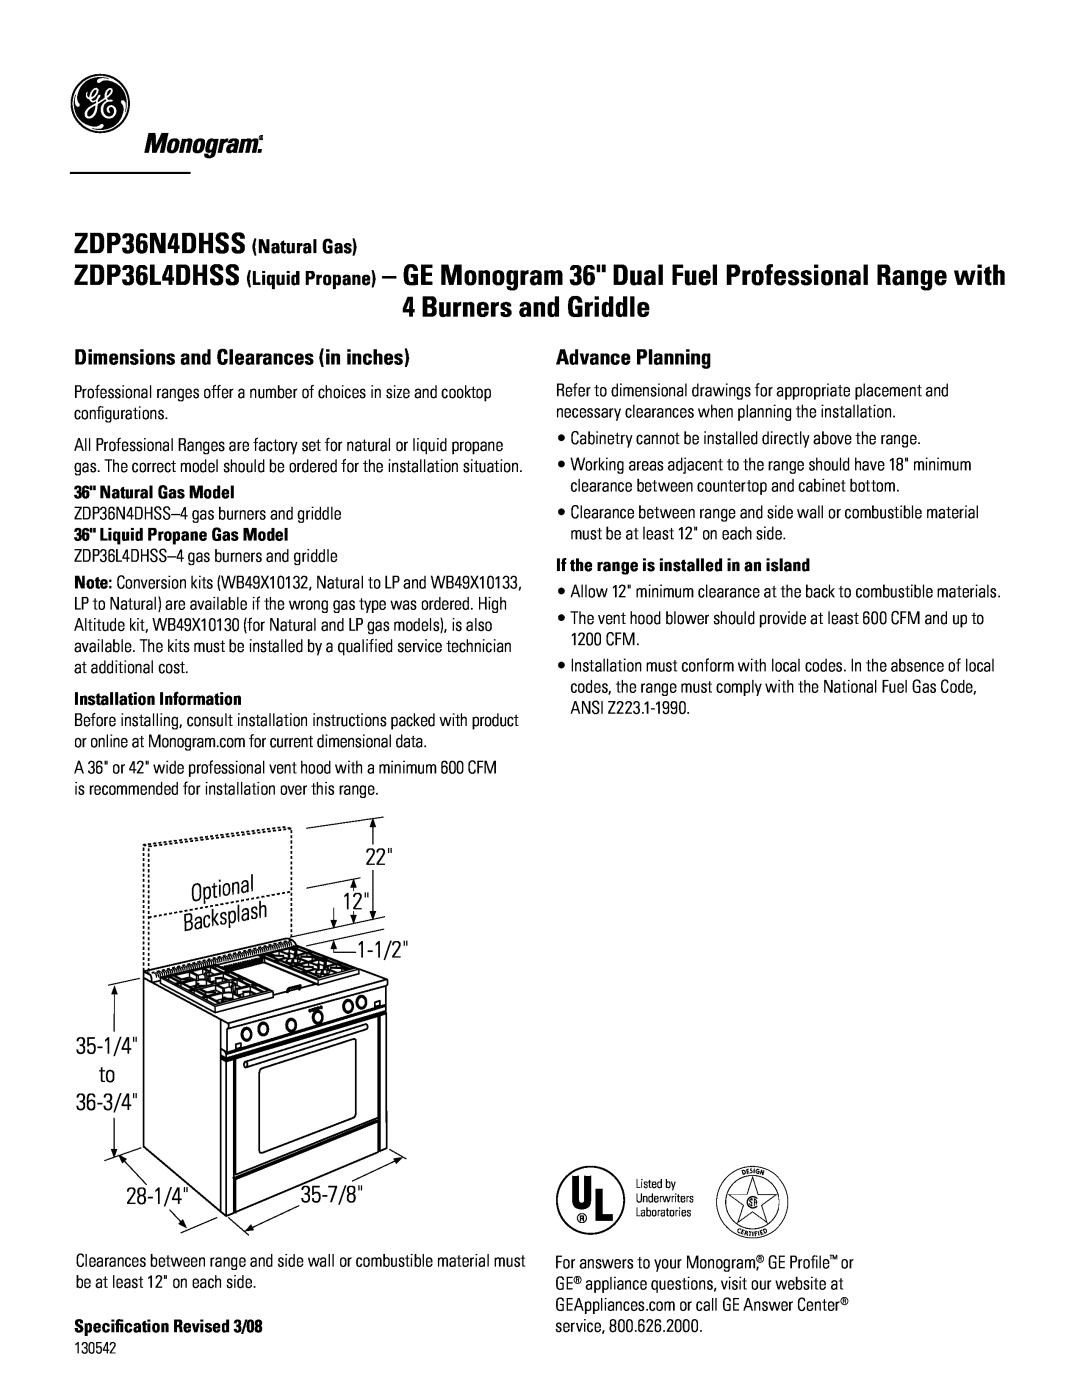 GE Monogram ZDP36N4DHSS dimensions Dimensions and Clearances in inches, Advance Planning, zdp36n4dhss Natural Gas 